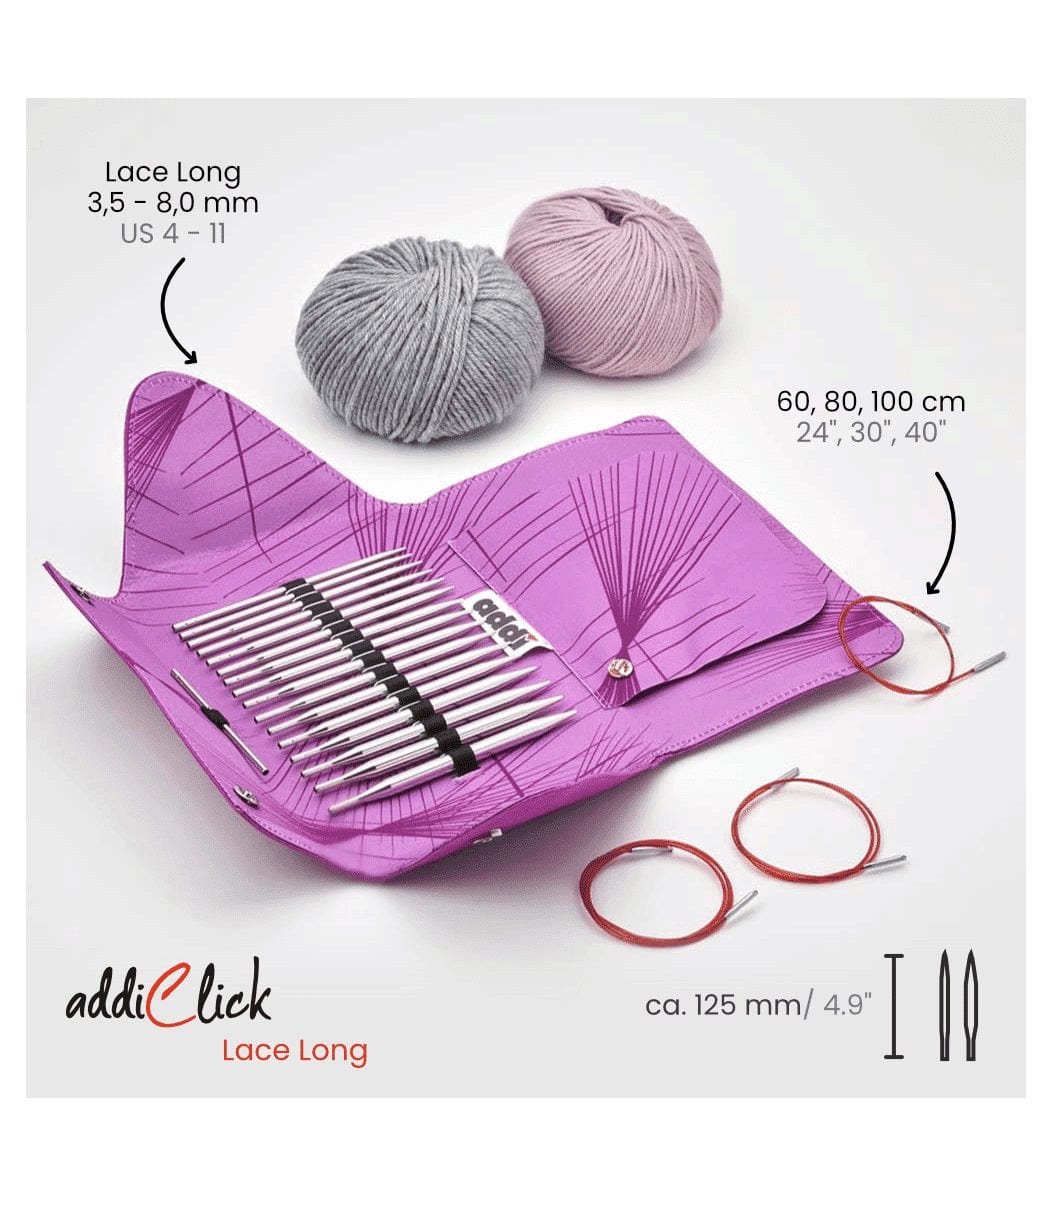 Click Lace Long Tips Interchangeable Circular Knitting Needle Set - The Icelandic Store